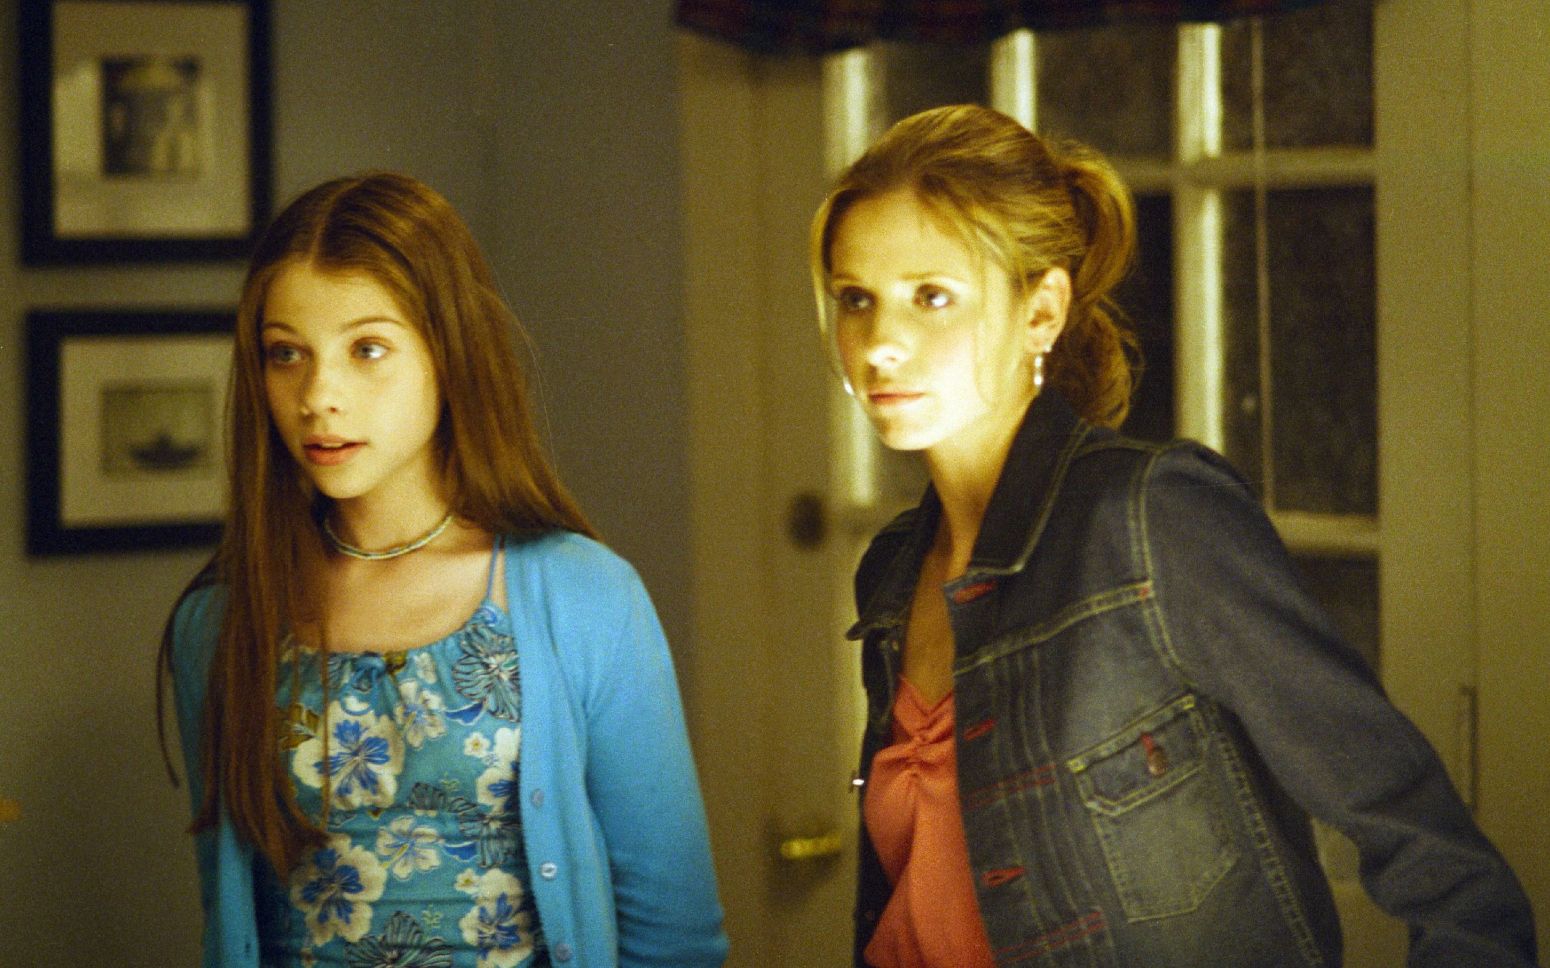 Dawn Was Introduced In Season 5 Of Buffy The Vampire Slayer